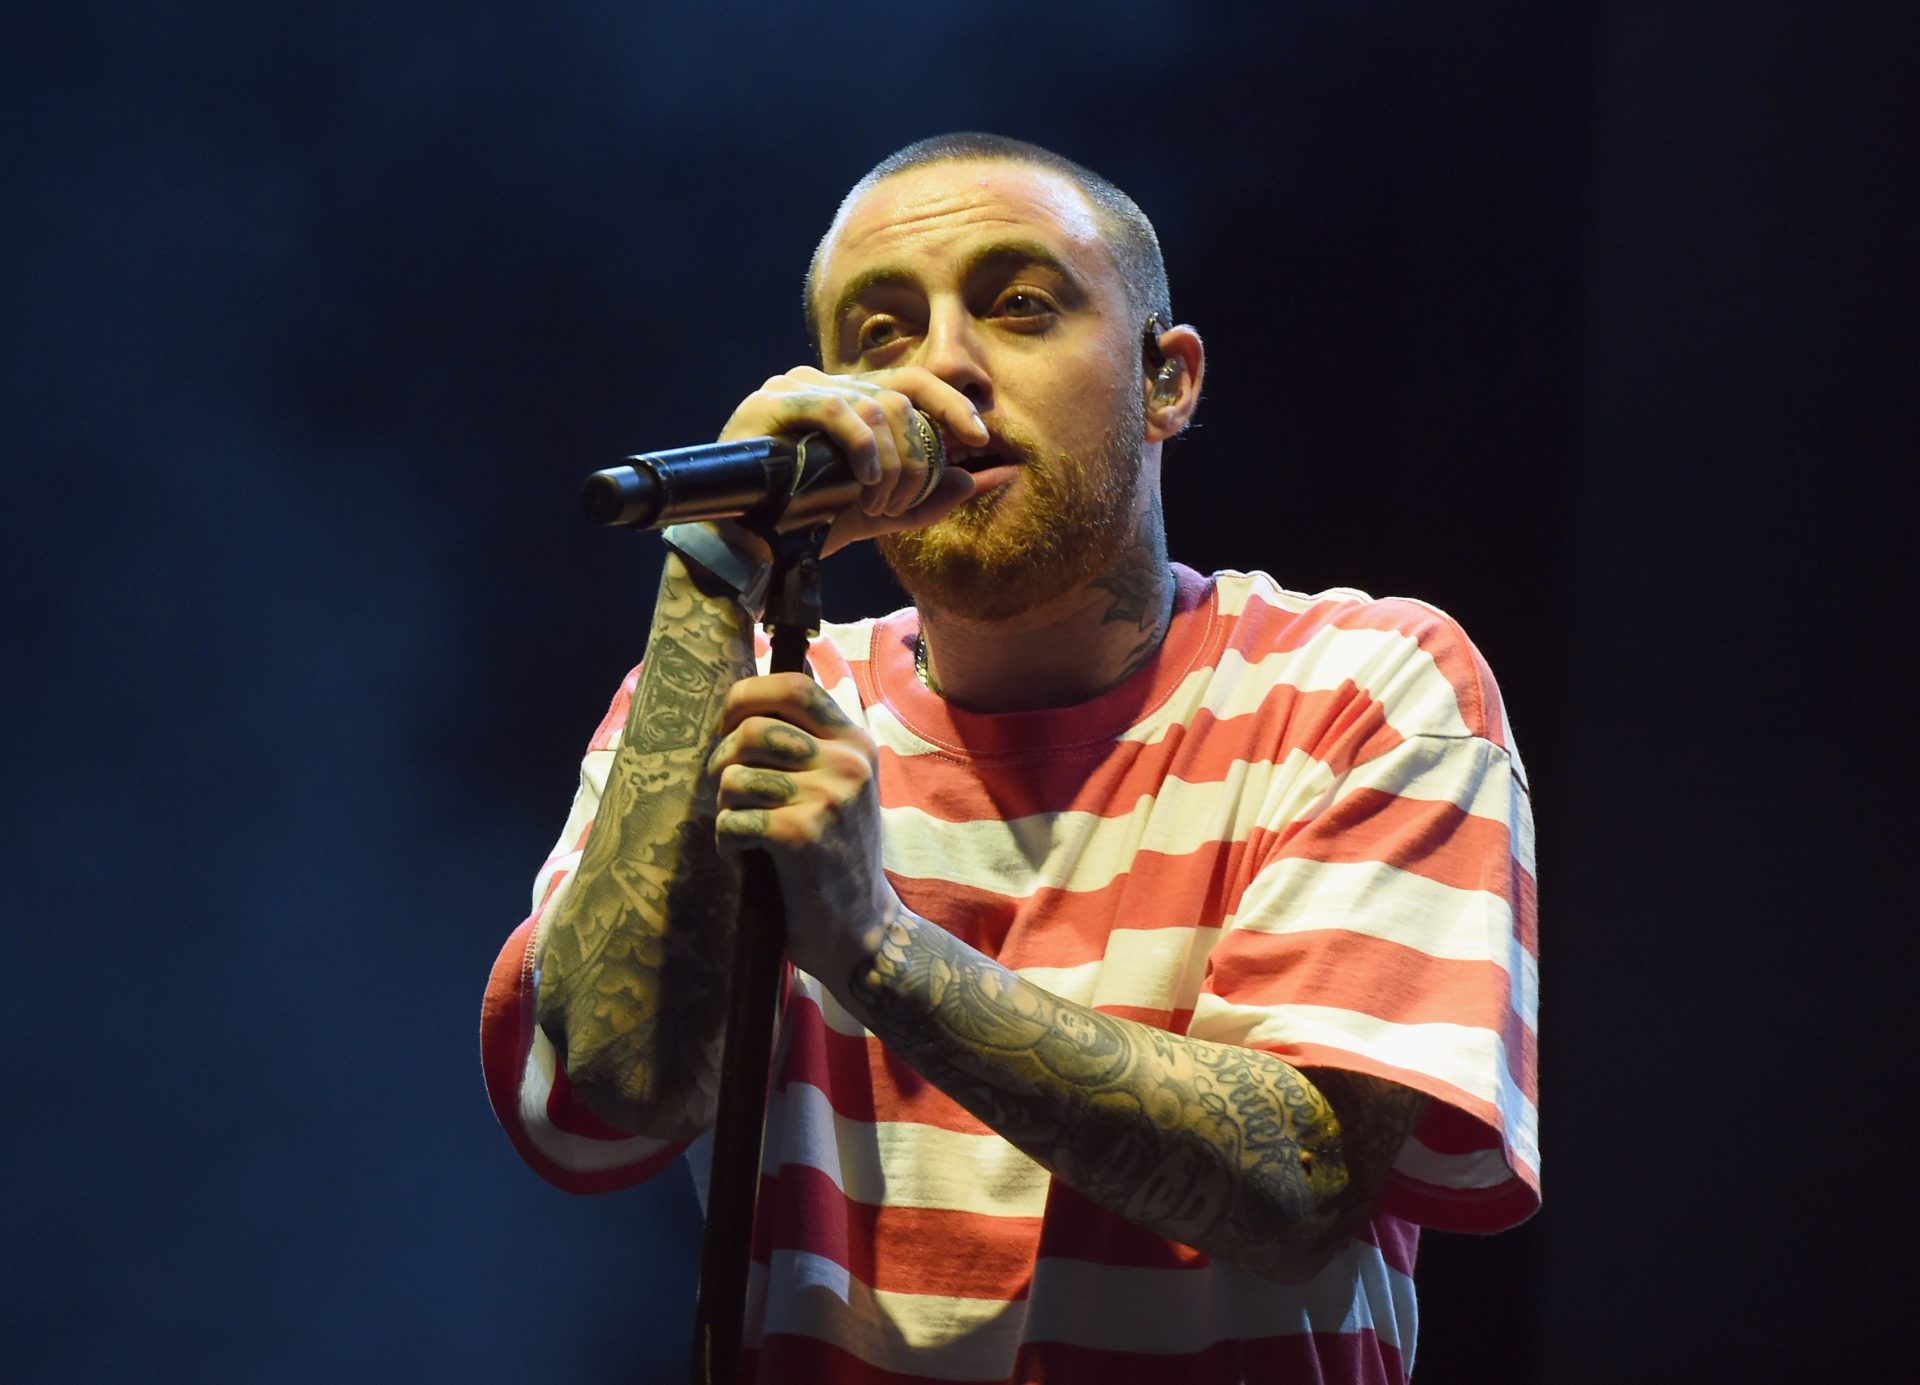 Dealer Sentenced To More Than 17 Years In Prison For Supplying The Drugs That Led To Mac Miller's Death 